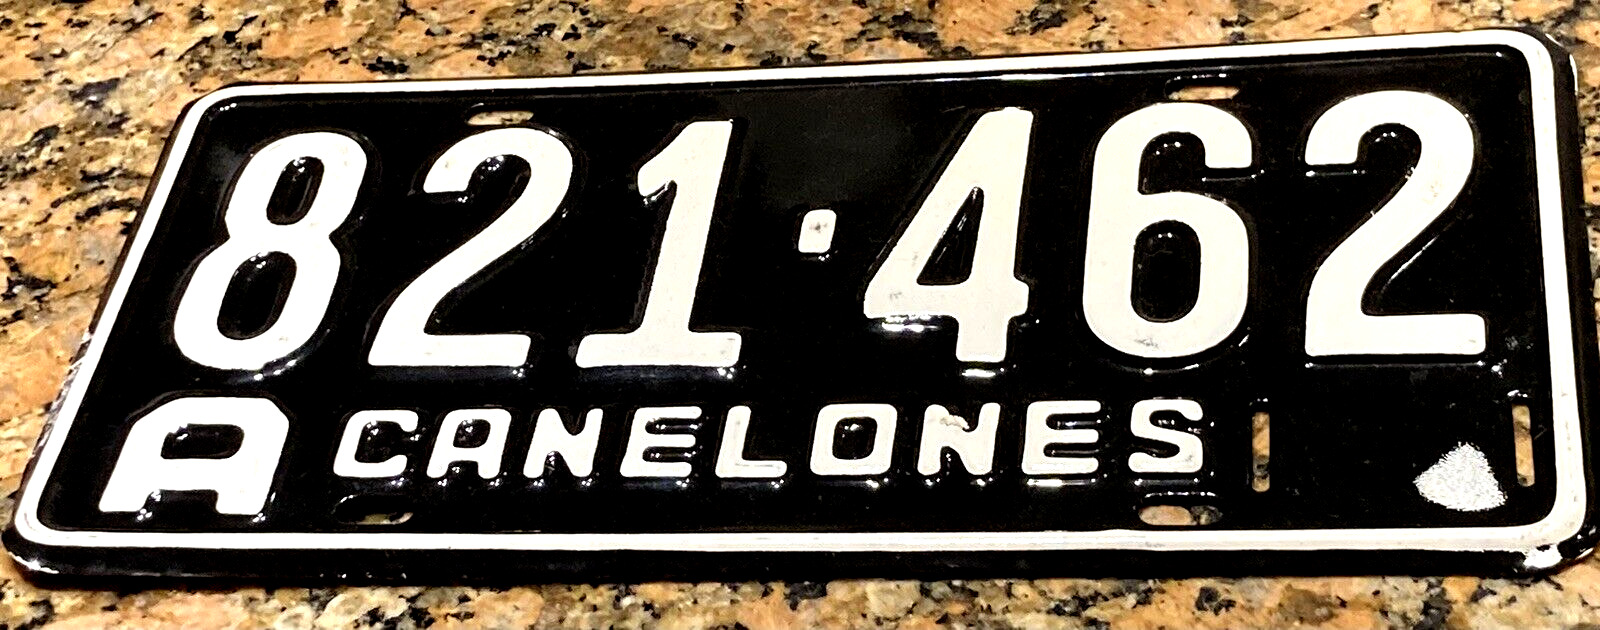 Uruguay license plate 1970s 8A 21-462 CANELONES thick heavy Foreign tag